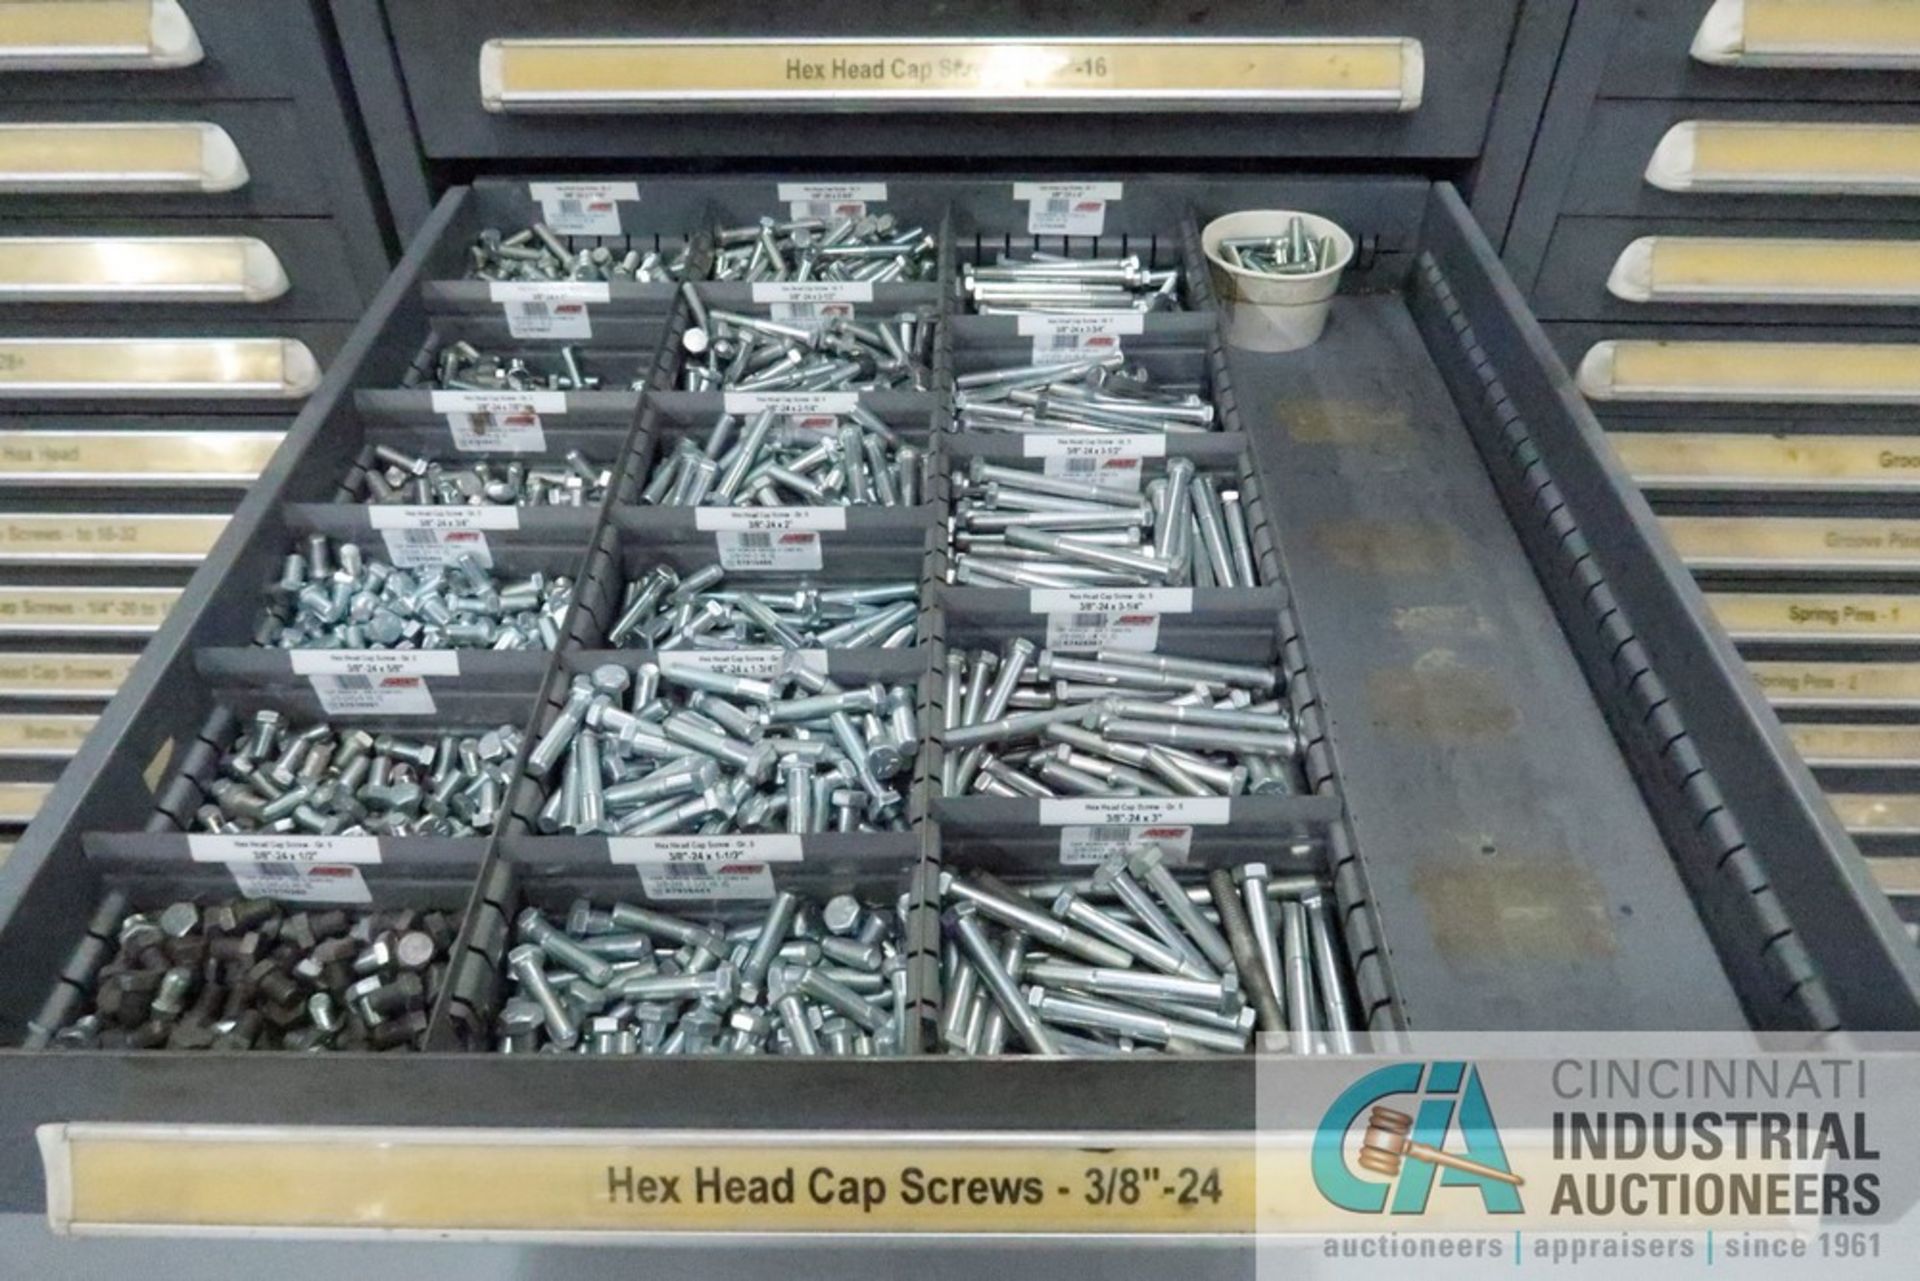 (LOT) 13-DRAWER VIDMAR CABINET WITH CONTENTS INCLUDING HEX HEAD CAP SCREWS (CABINET 7) - Image 7 of 14